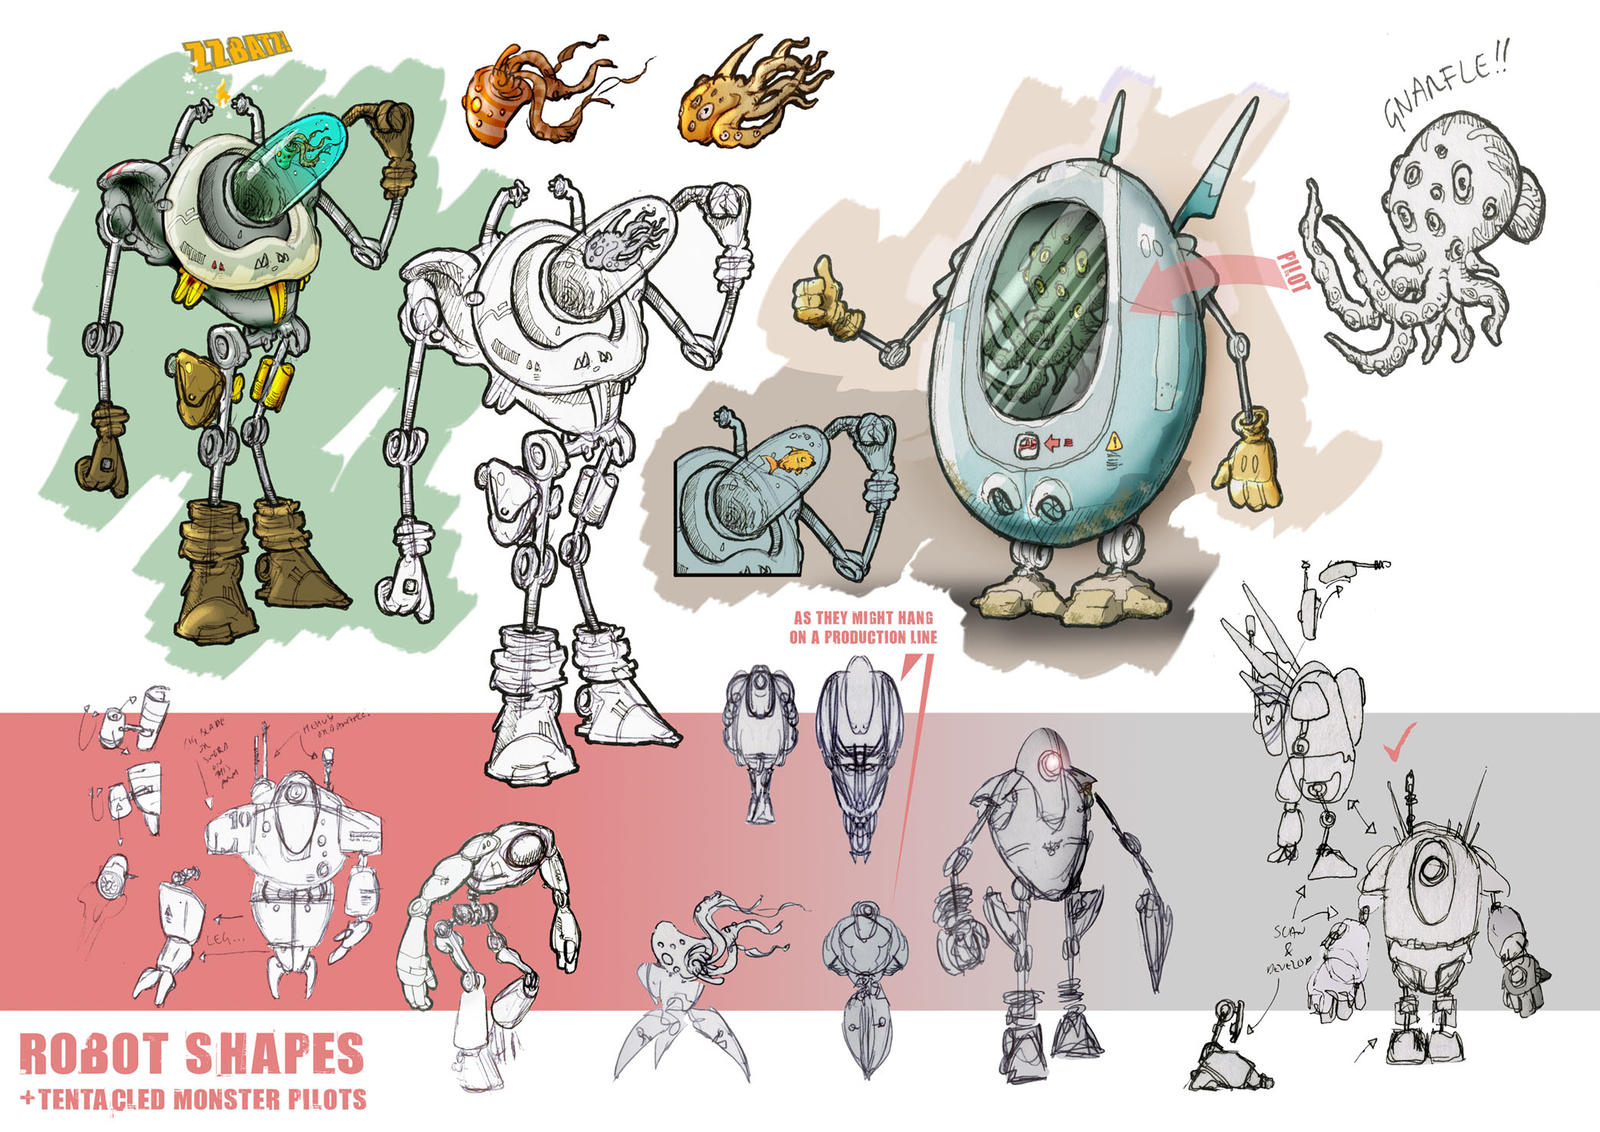 Robot Shapes by hesir on DeviantArt